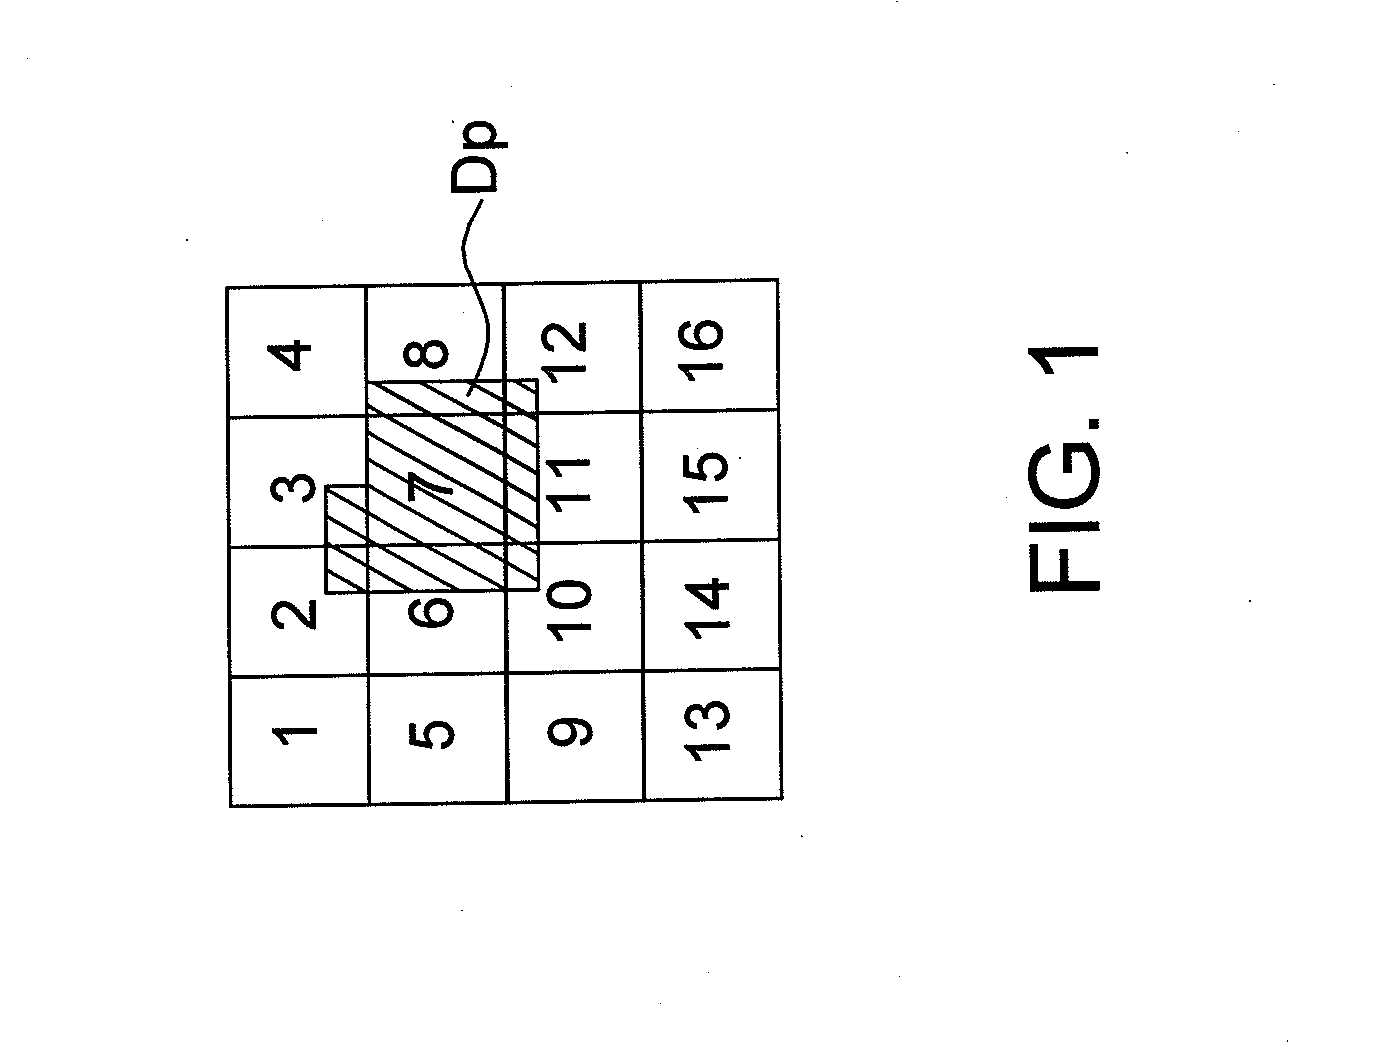 Method and Apparatus for Displaying Images